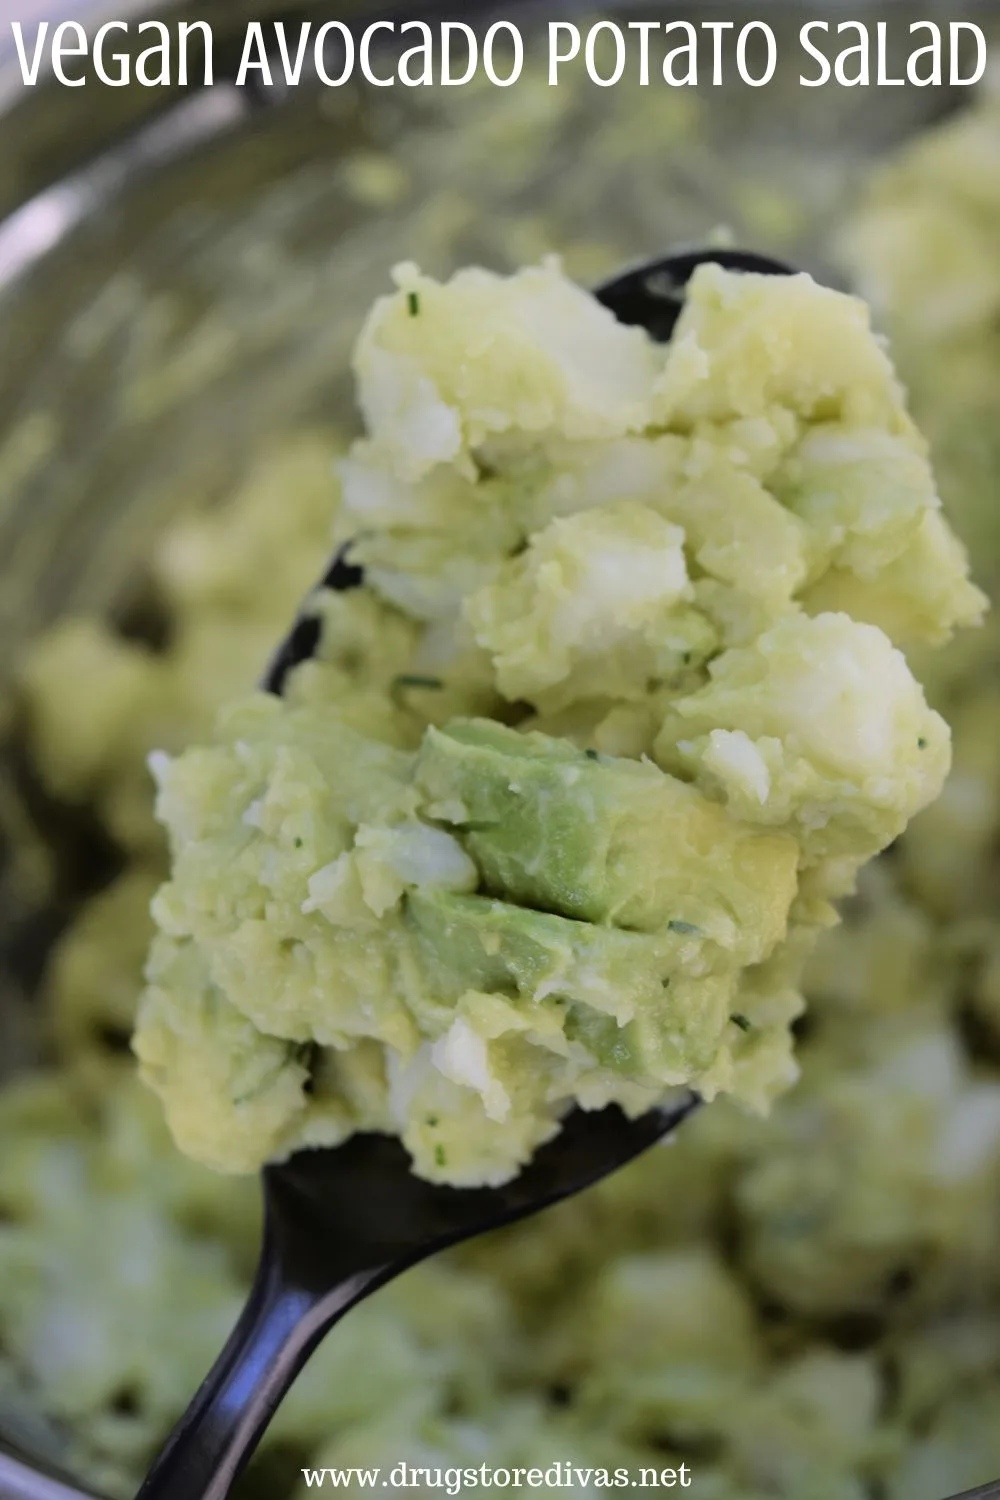 A spoon holding a scoop of avocado potato salad with the words 